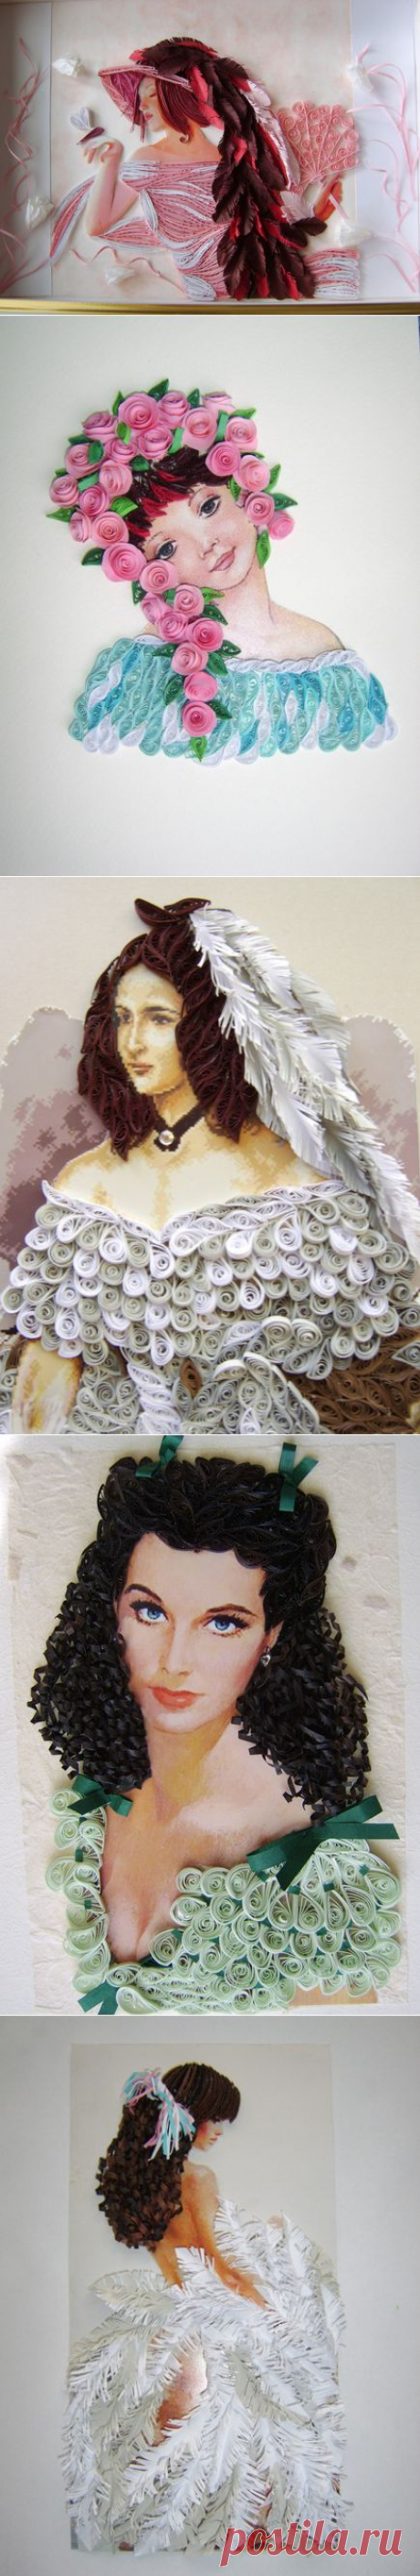 quilling art: female characters in the wonderful paper art - crafts ideas - crafts for kids